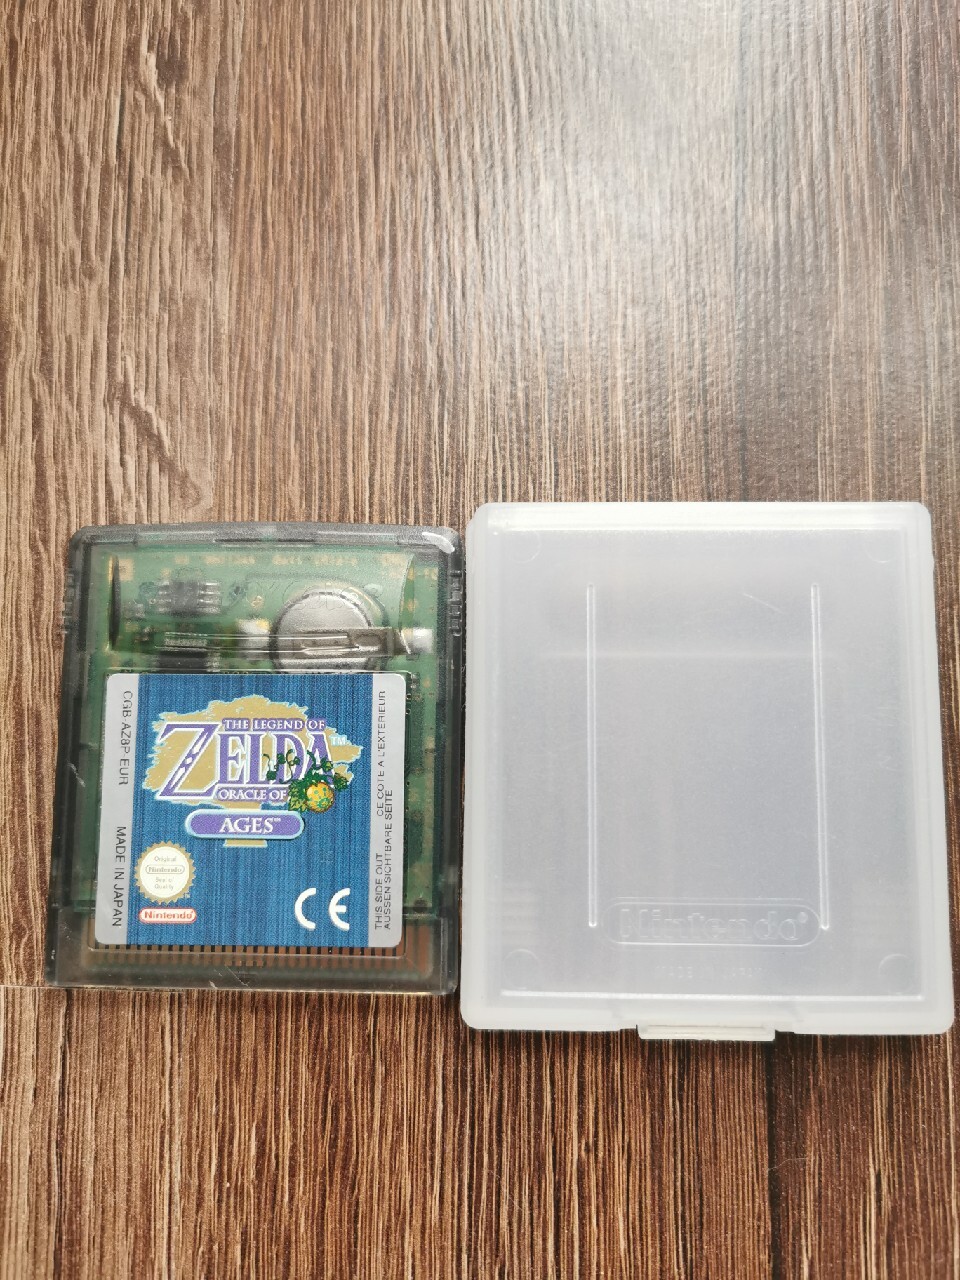 Zelda Oracle of Ages po angielsku Game Boy Color., Miechów